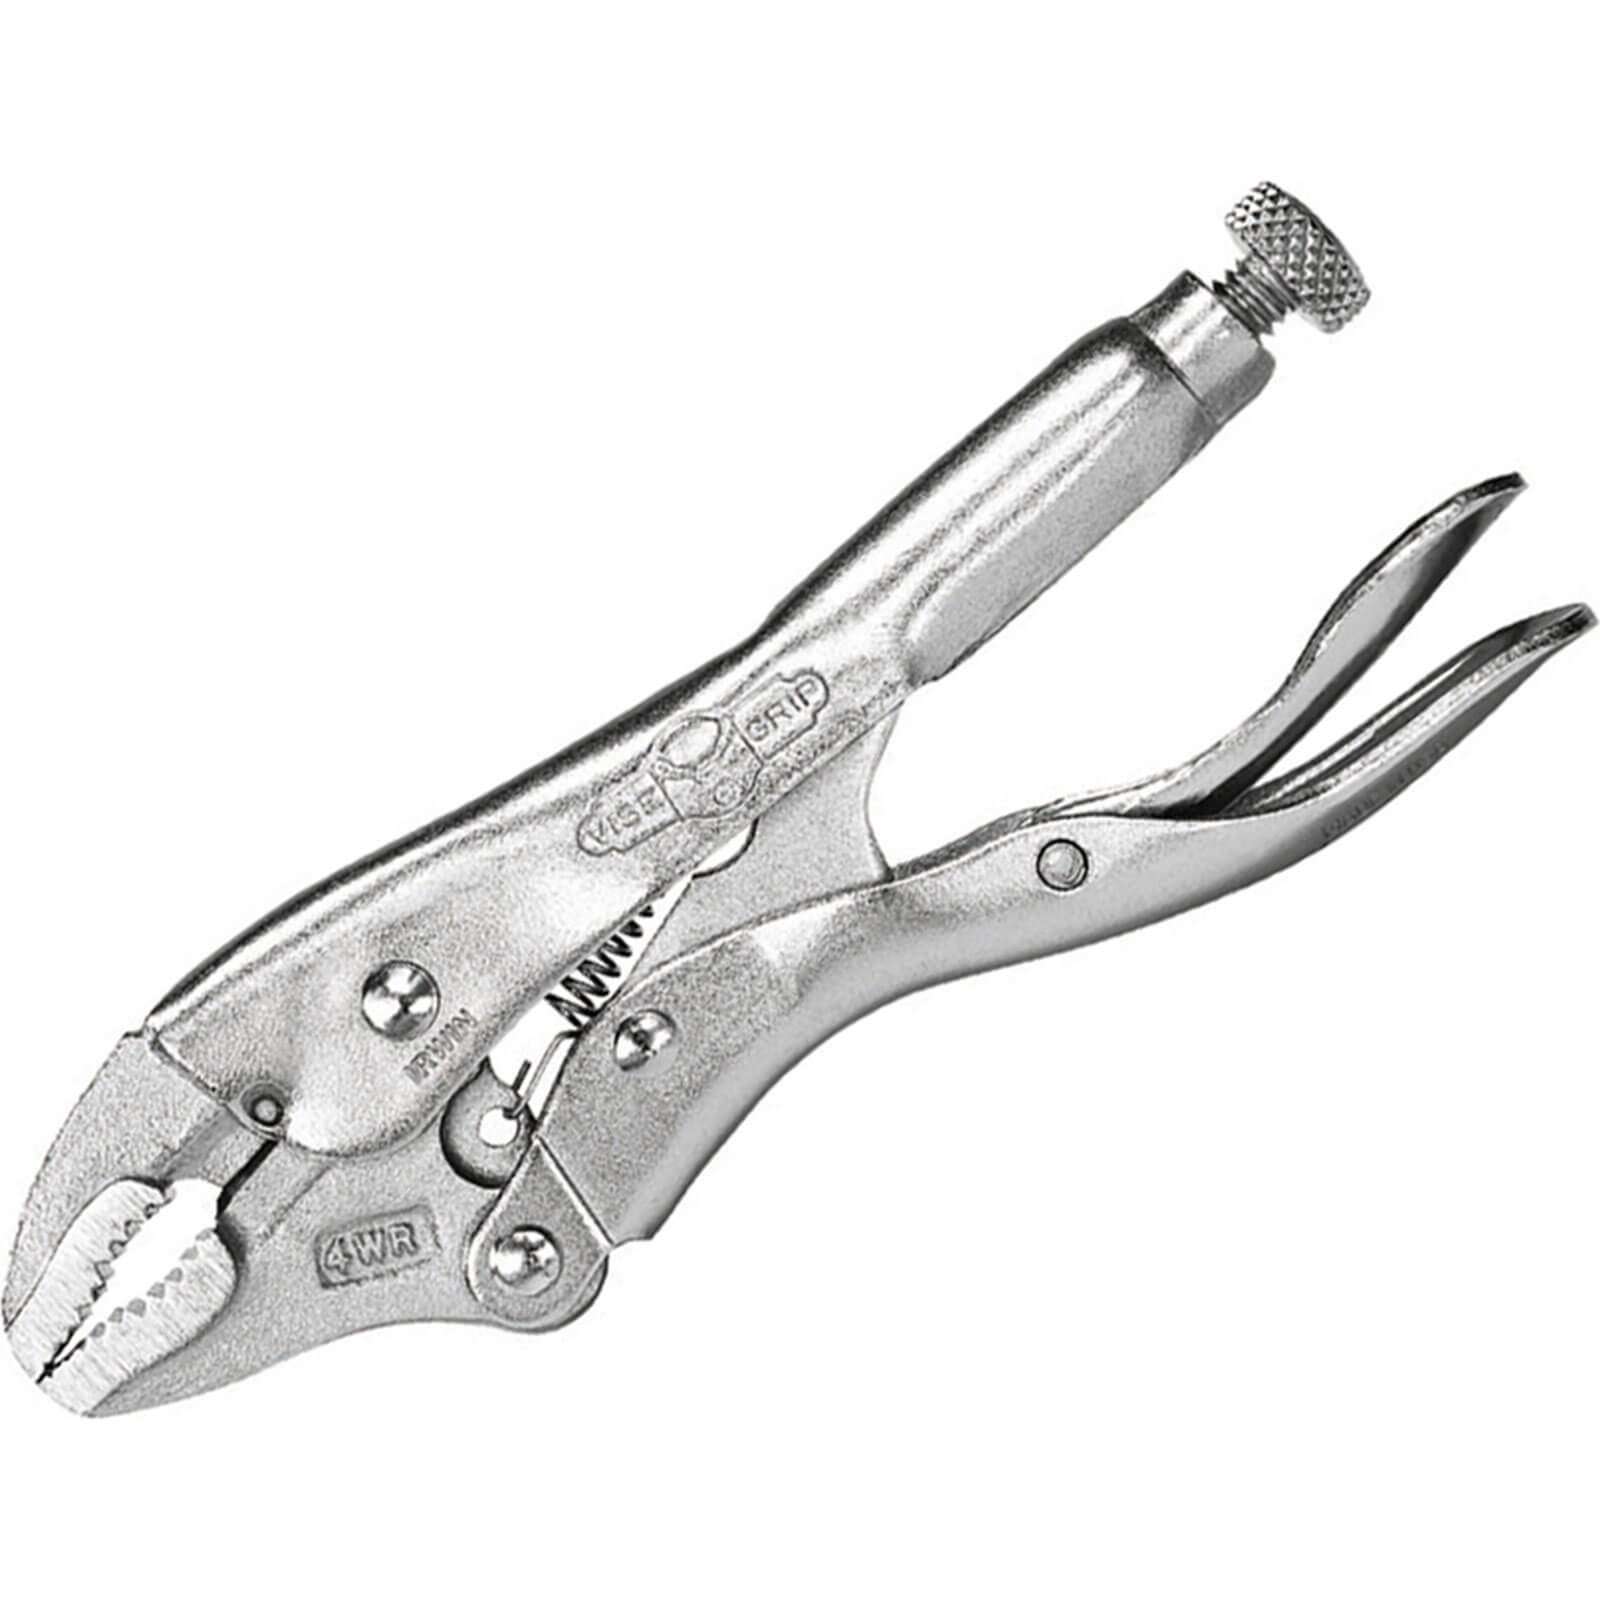 Photo of Irwin Vise Grip Curved Jaw Wire Cutting Locking Pliers 100mm